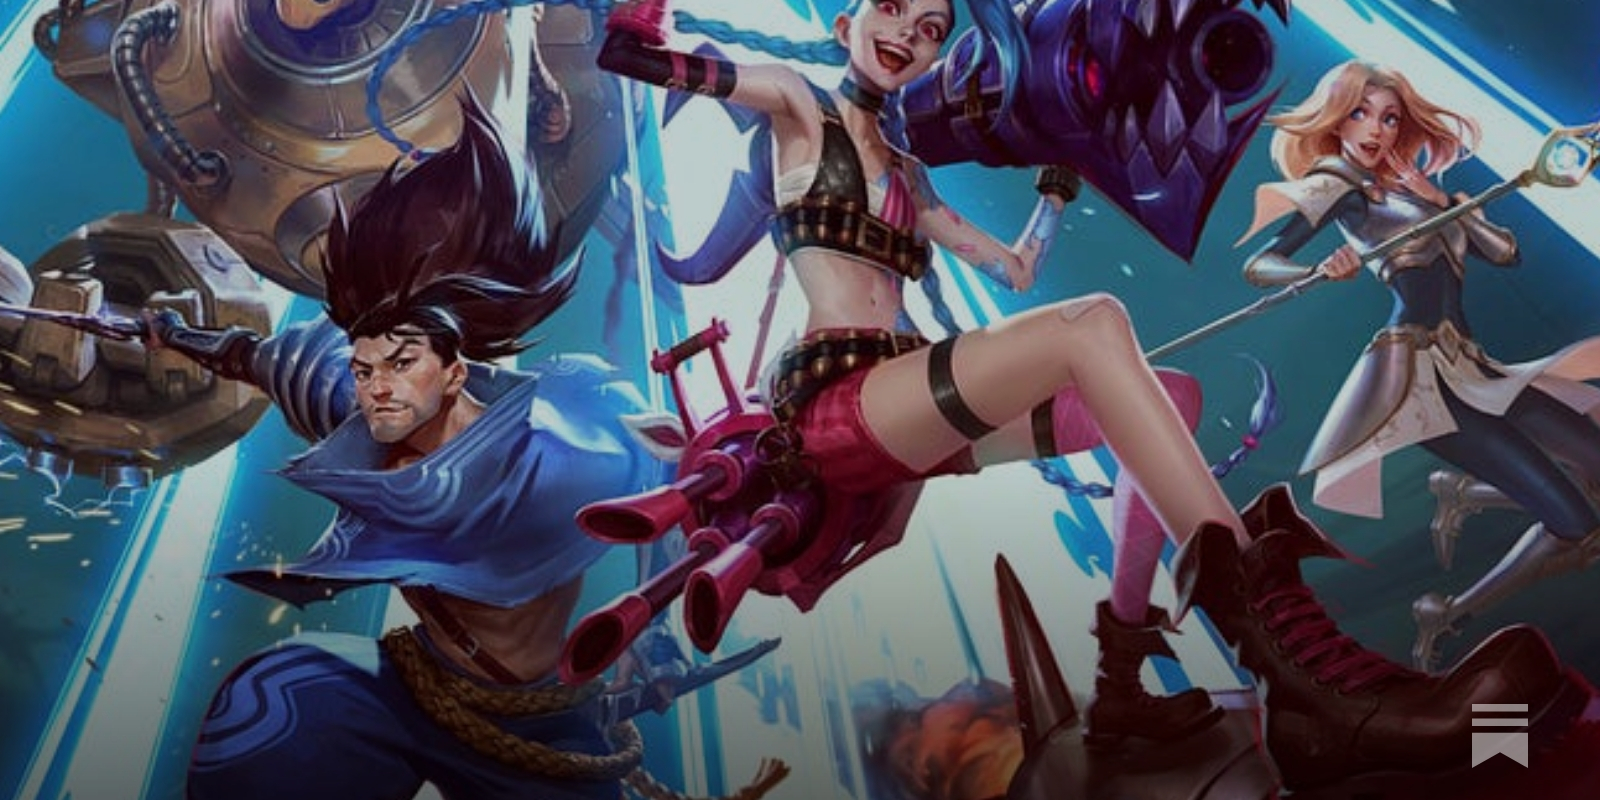 League of Legends: Wild Rift tops $1 billion in revenue, joining club of  100+ games that hit this milestone